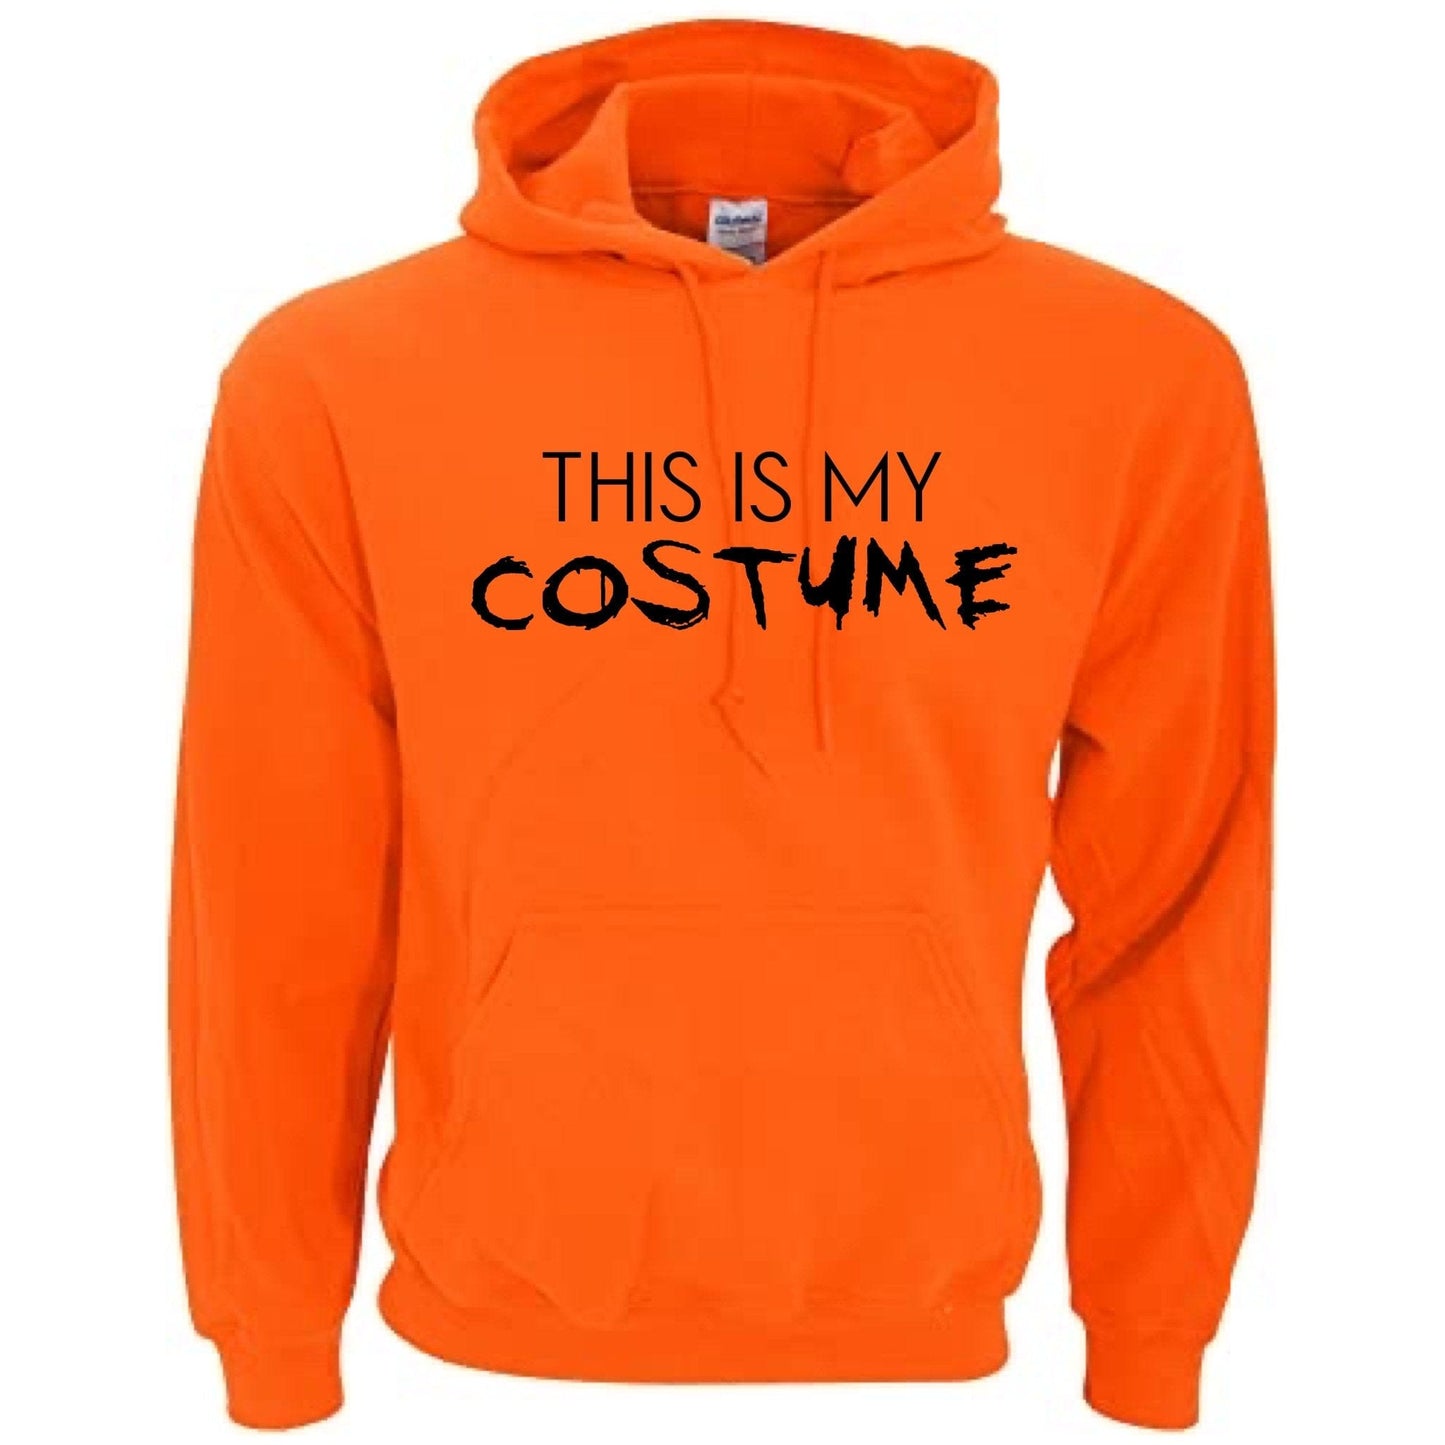 InsensitiviTees Shirts This Is My Costume Hoodie